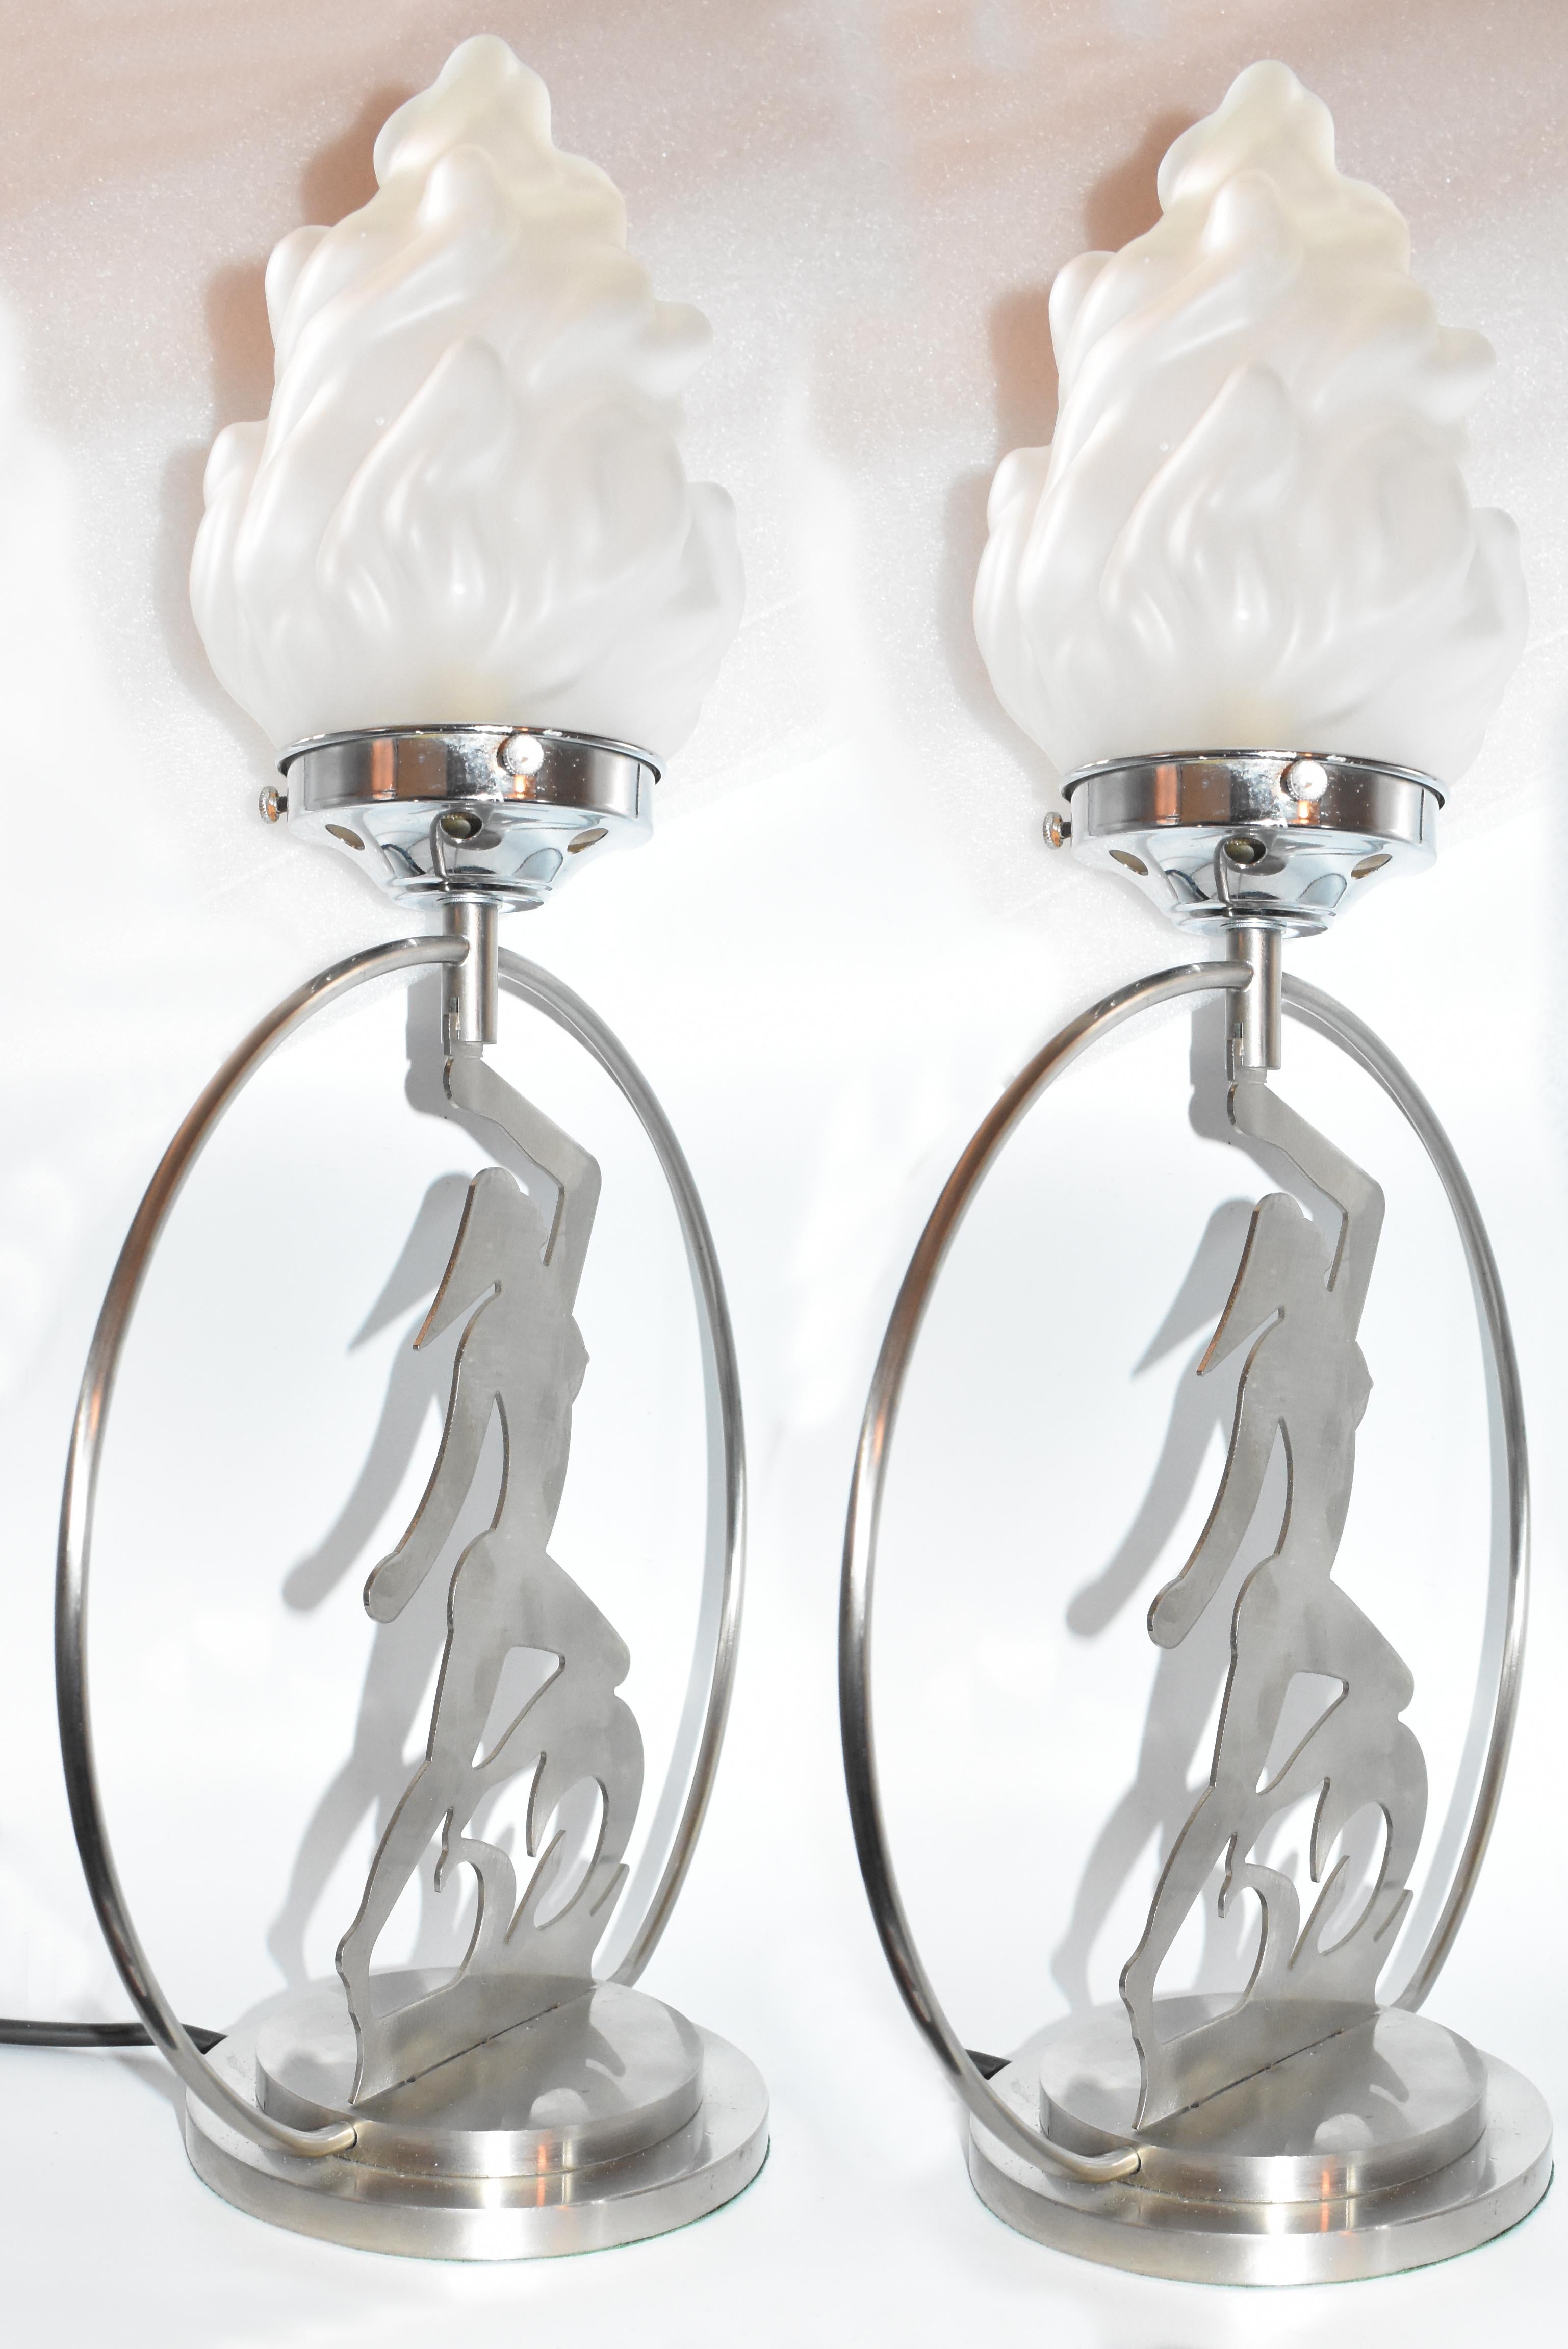 For your consideration are these Art Deco matching pair of table lamps. Both lamps depict a 2 dimensional female nude which supports a torch flame opaque glass shade. The body of the lamp seems to be a dulled chrome as opposed to the gallery which